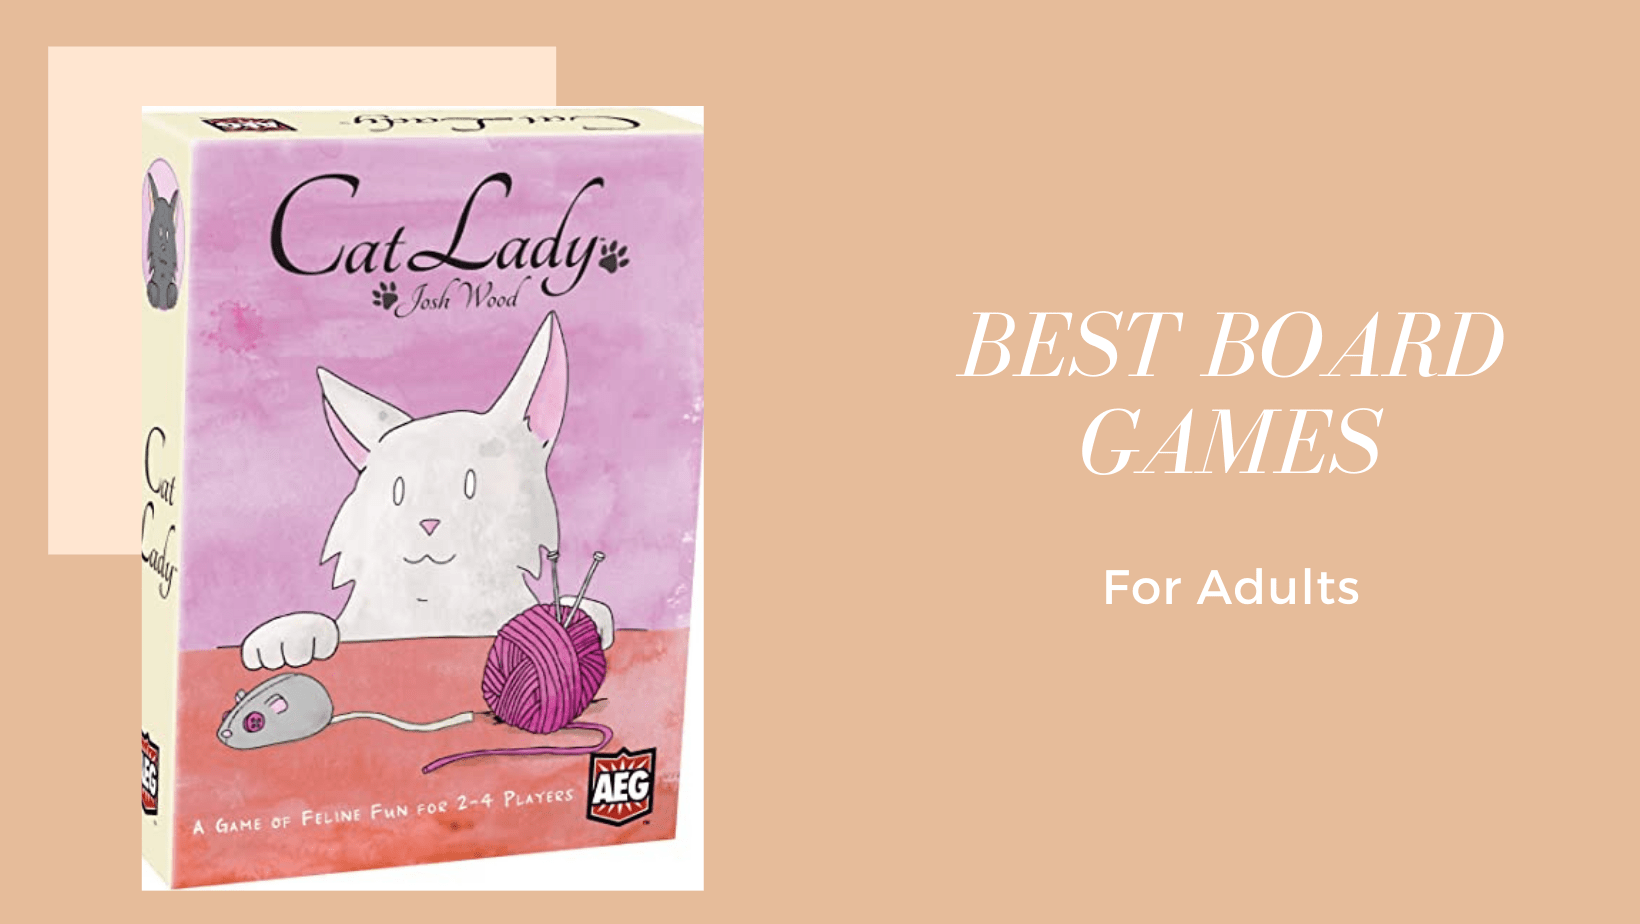 The board game Cat Lady as one of the best board games for adults.